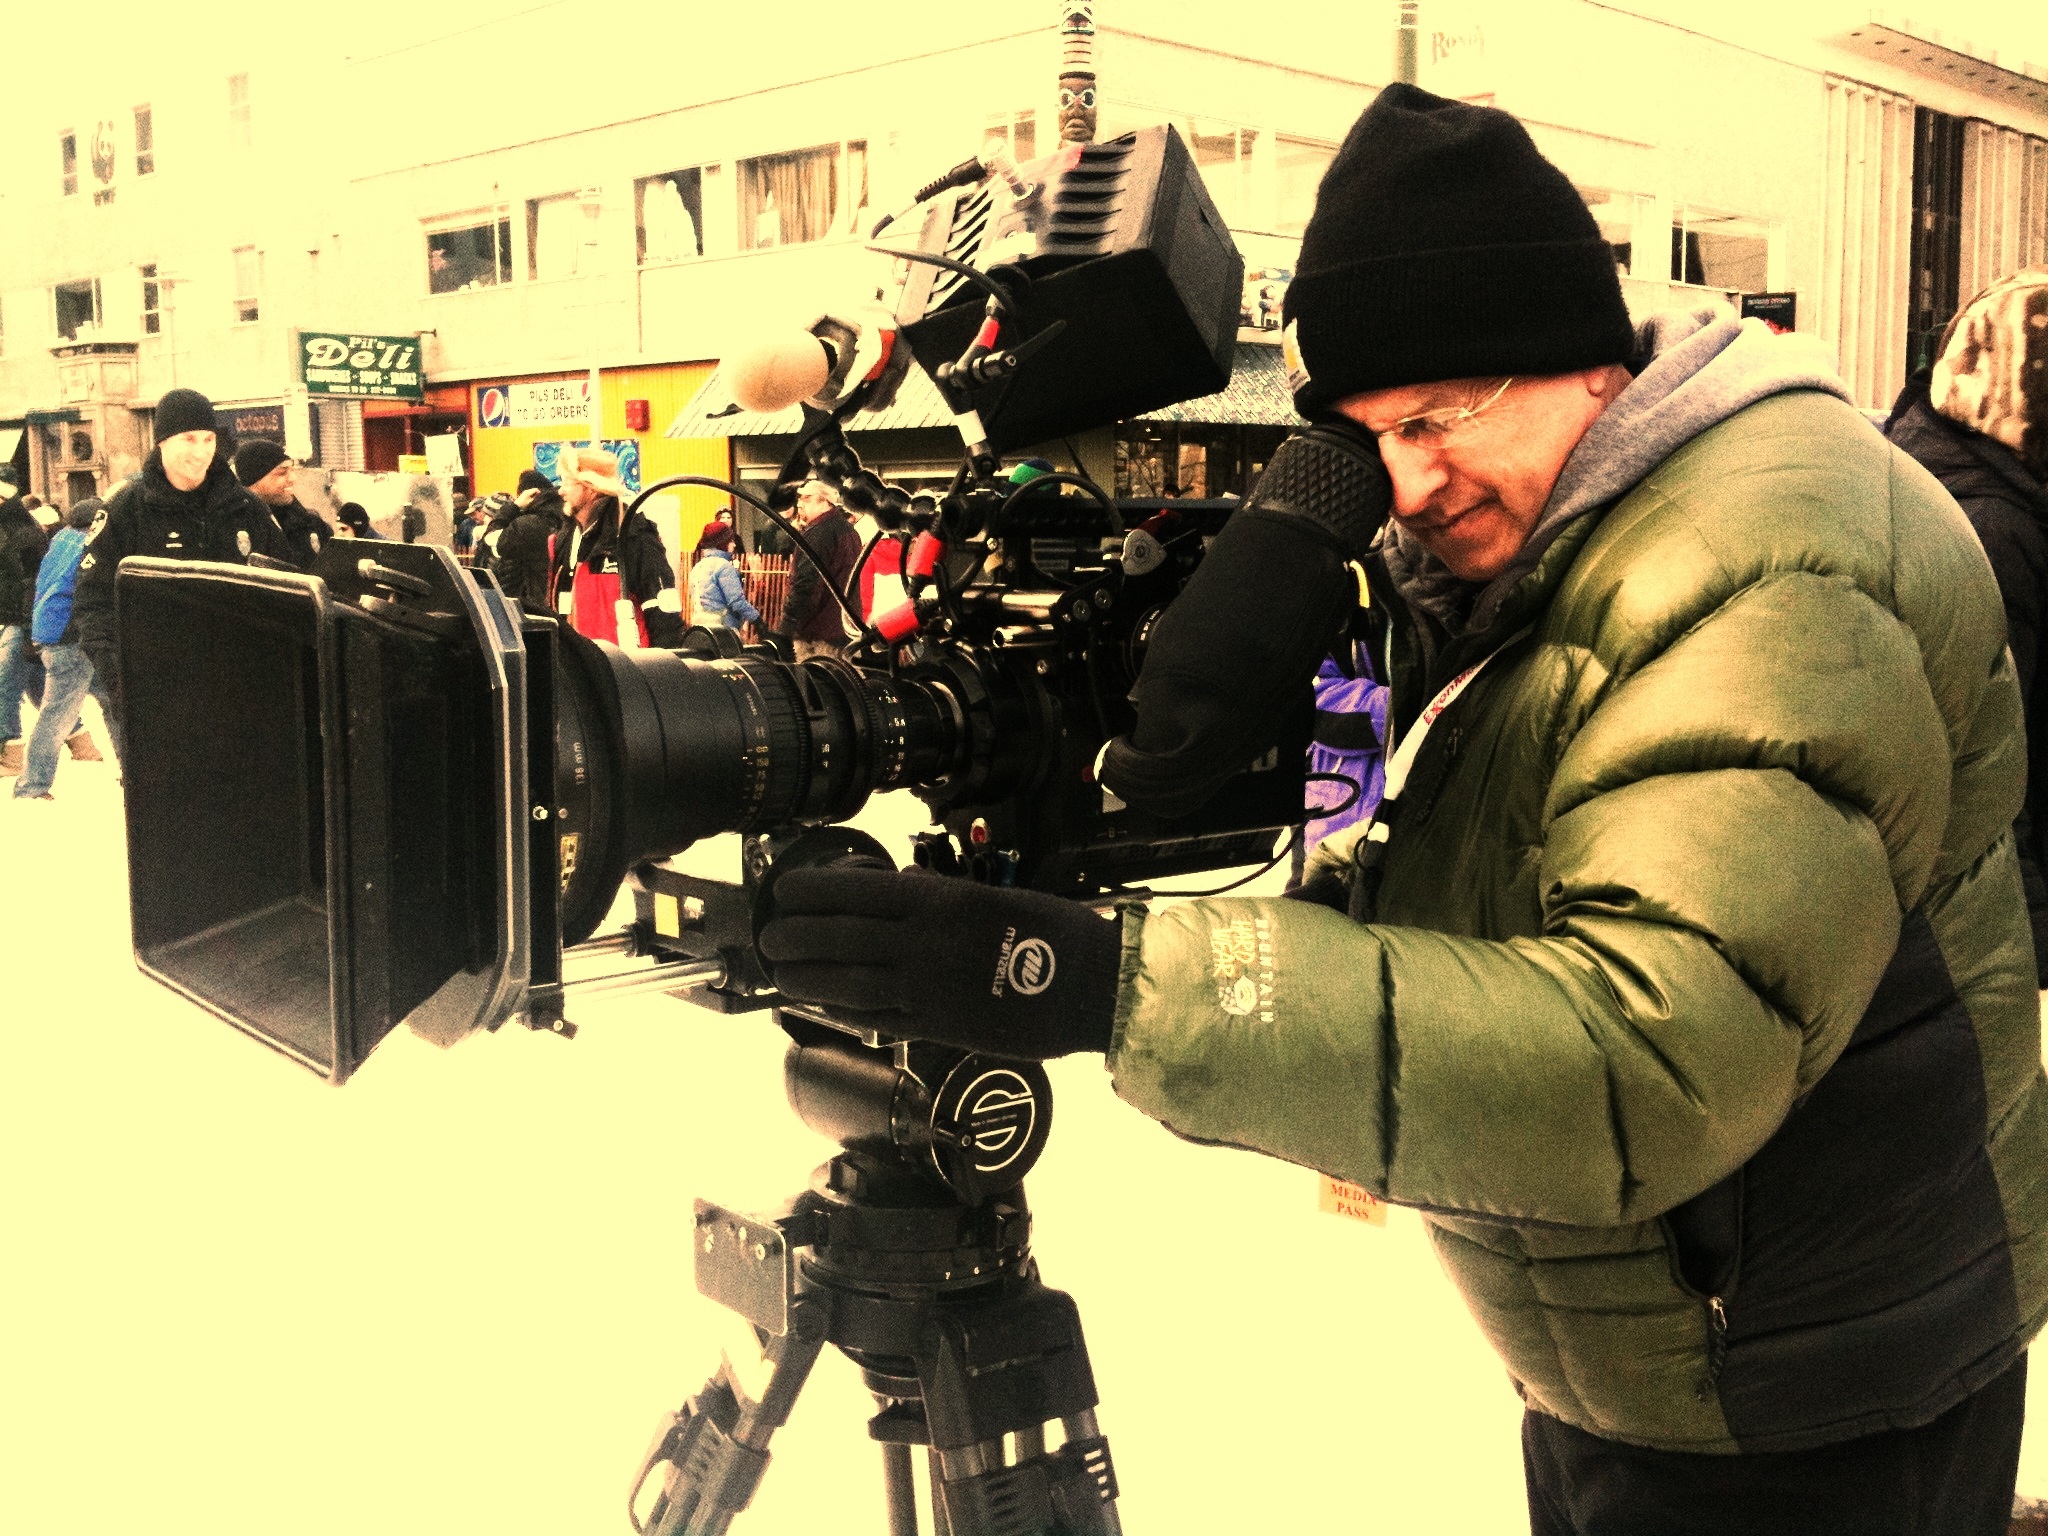 On location in Anchorage, Alaska at Iditarod start, for Tragedy Assistants Program for Survivors documentary shoot.